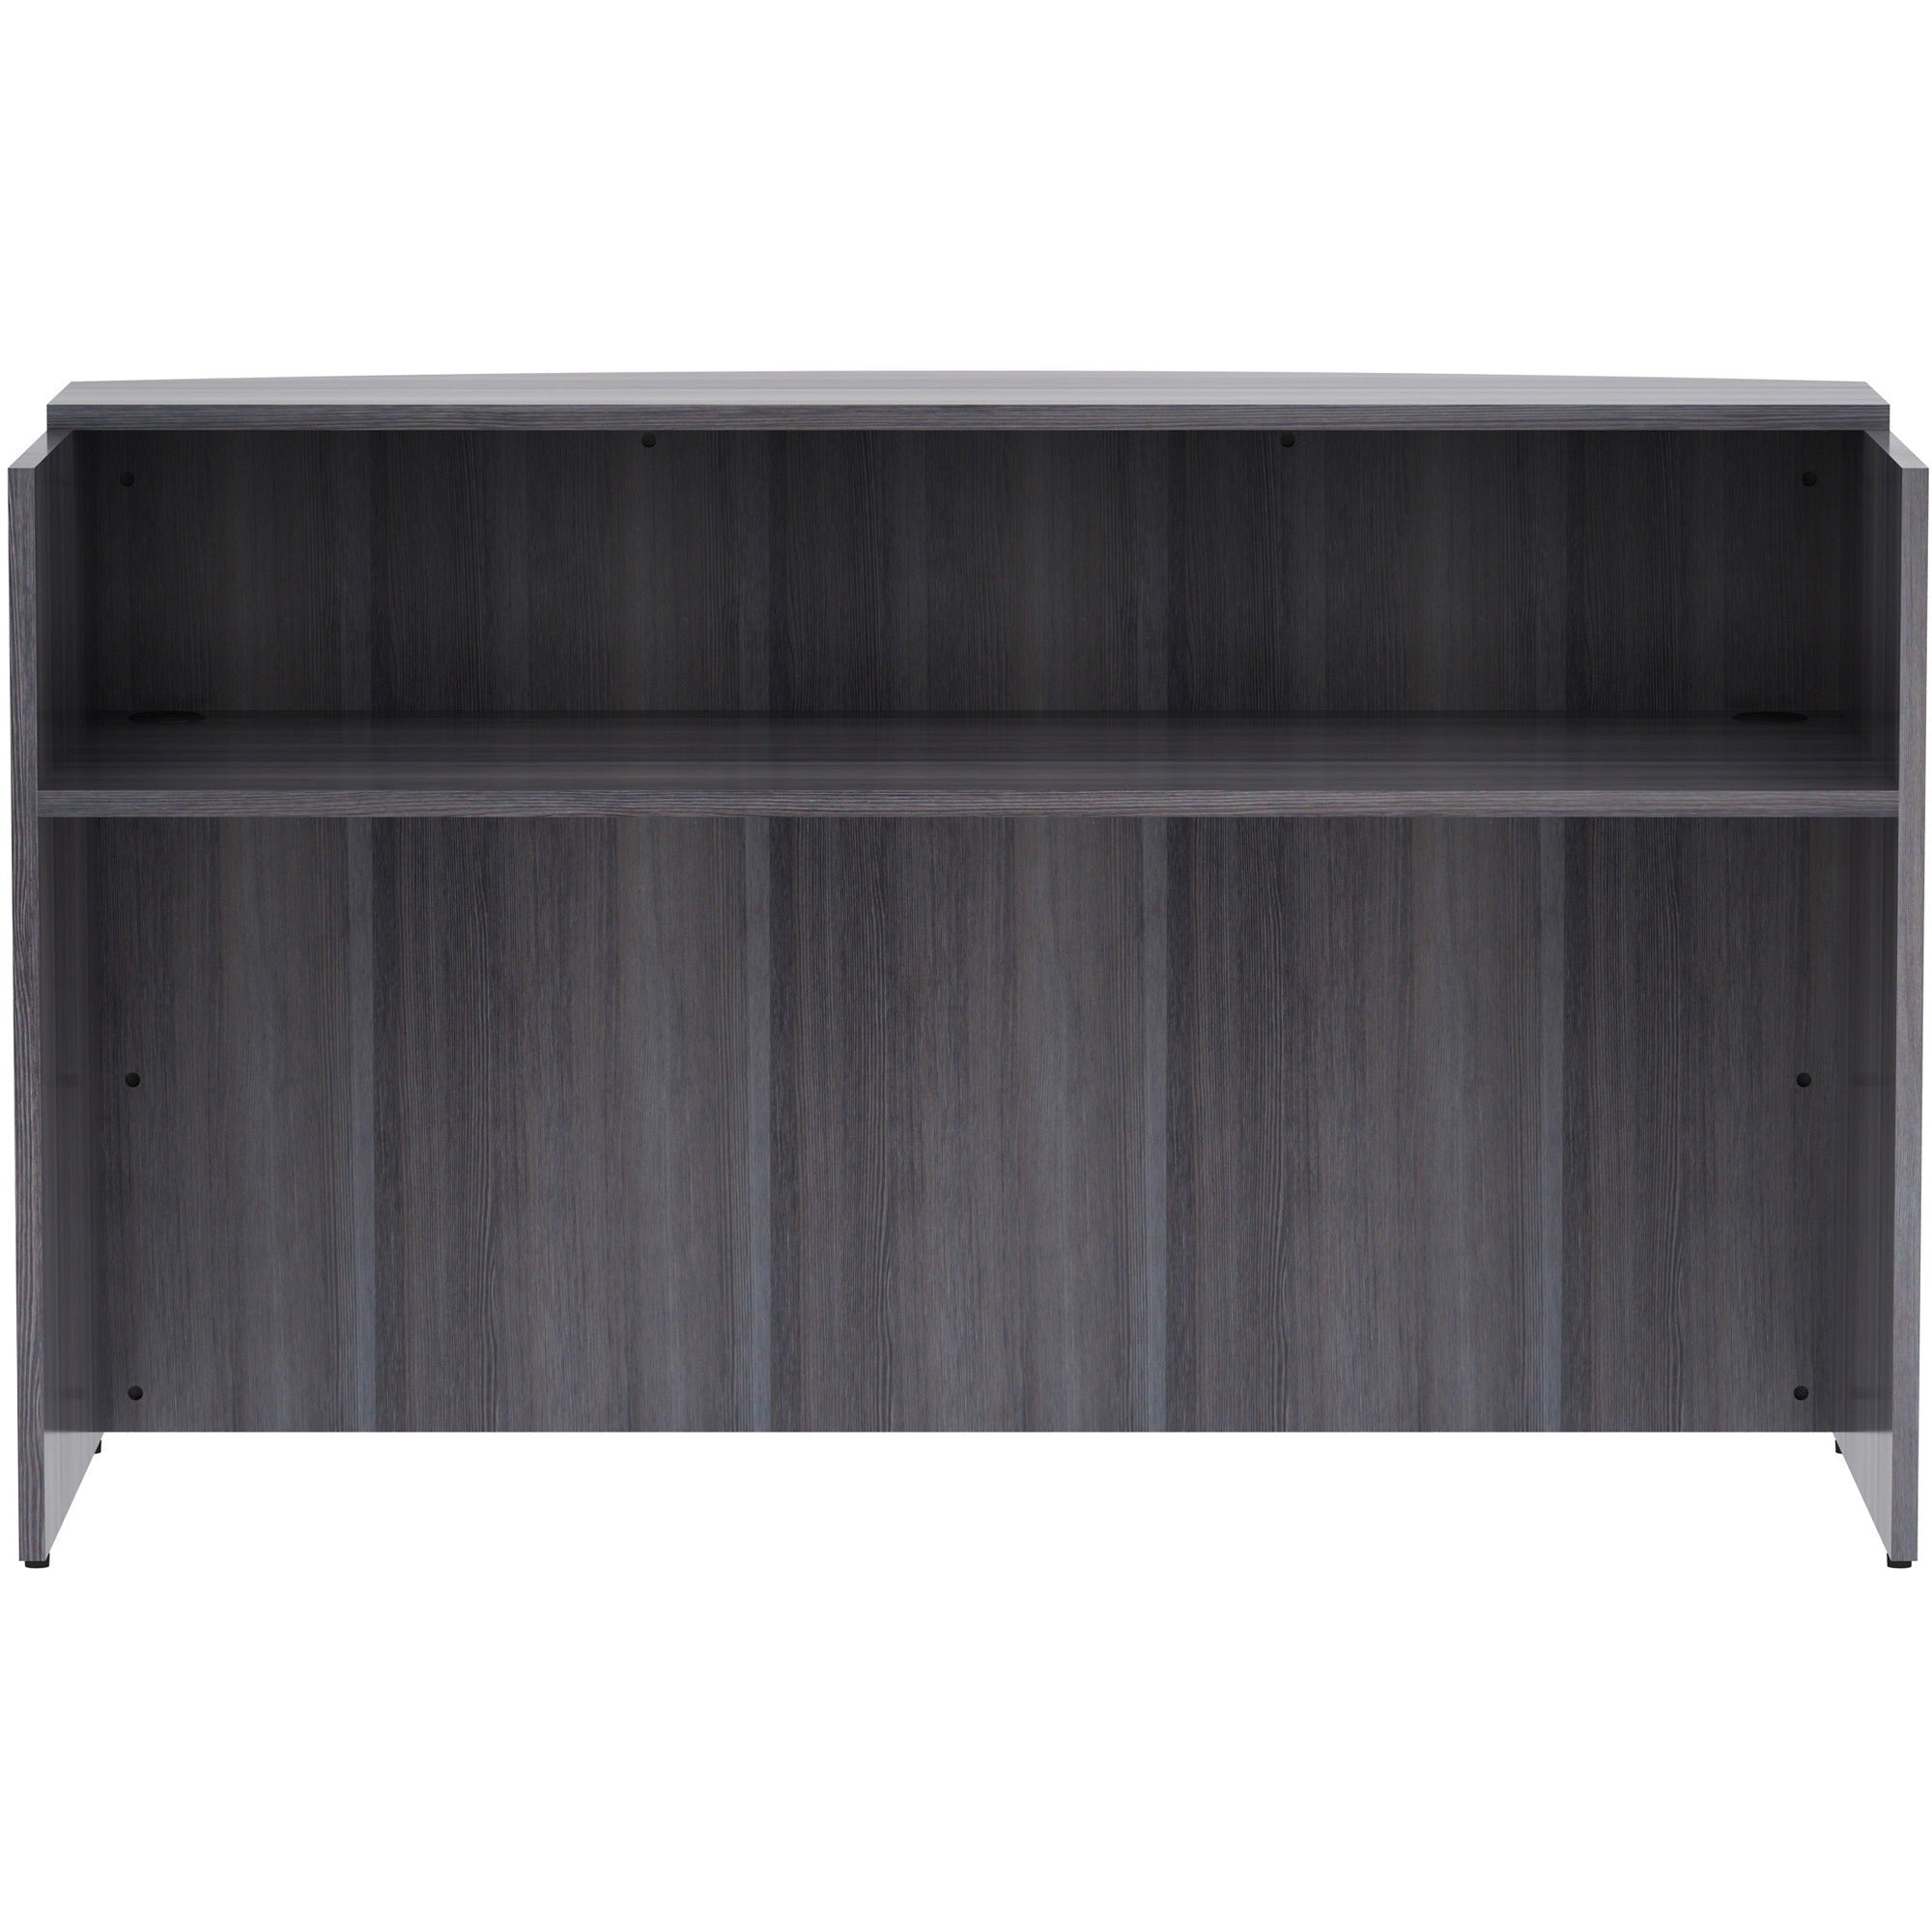 lorell-essentials-series-front-reception-desk-72-x-36425-desk-1-top-finish-weathered-charcoal-laminate_llr69595 - 2